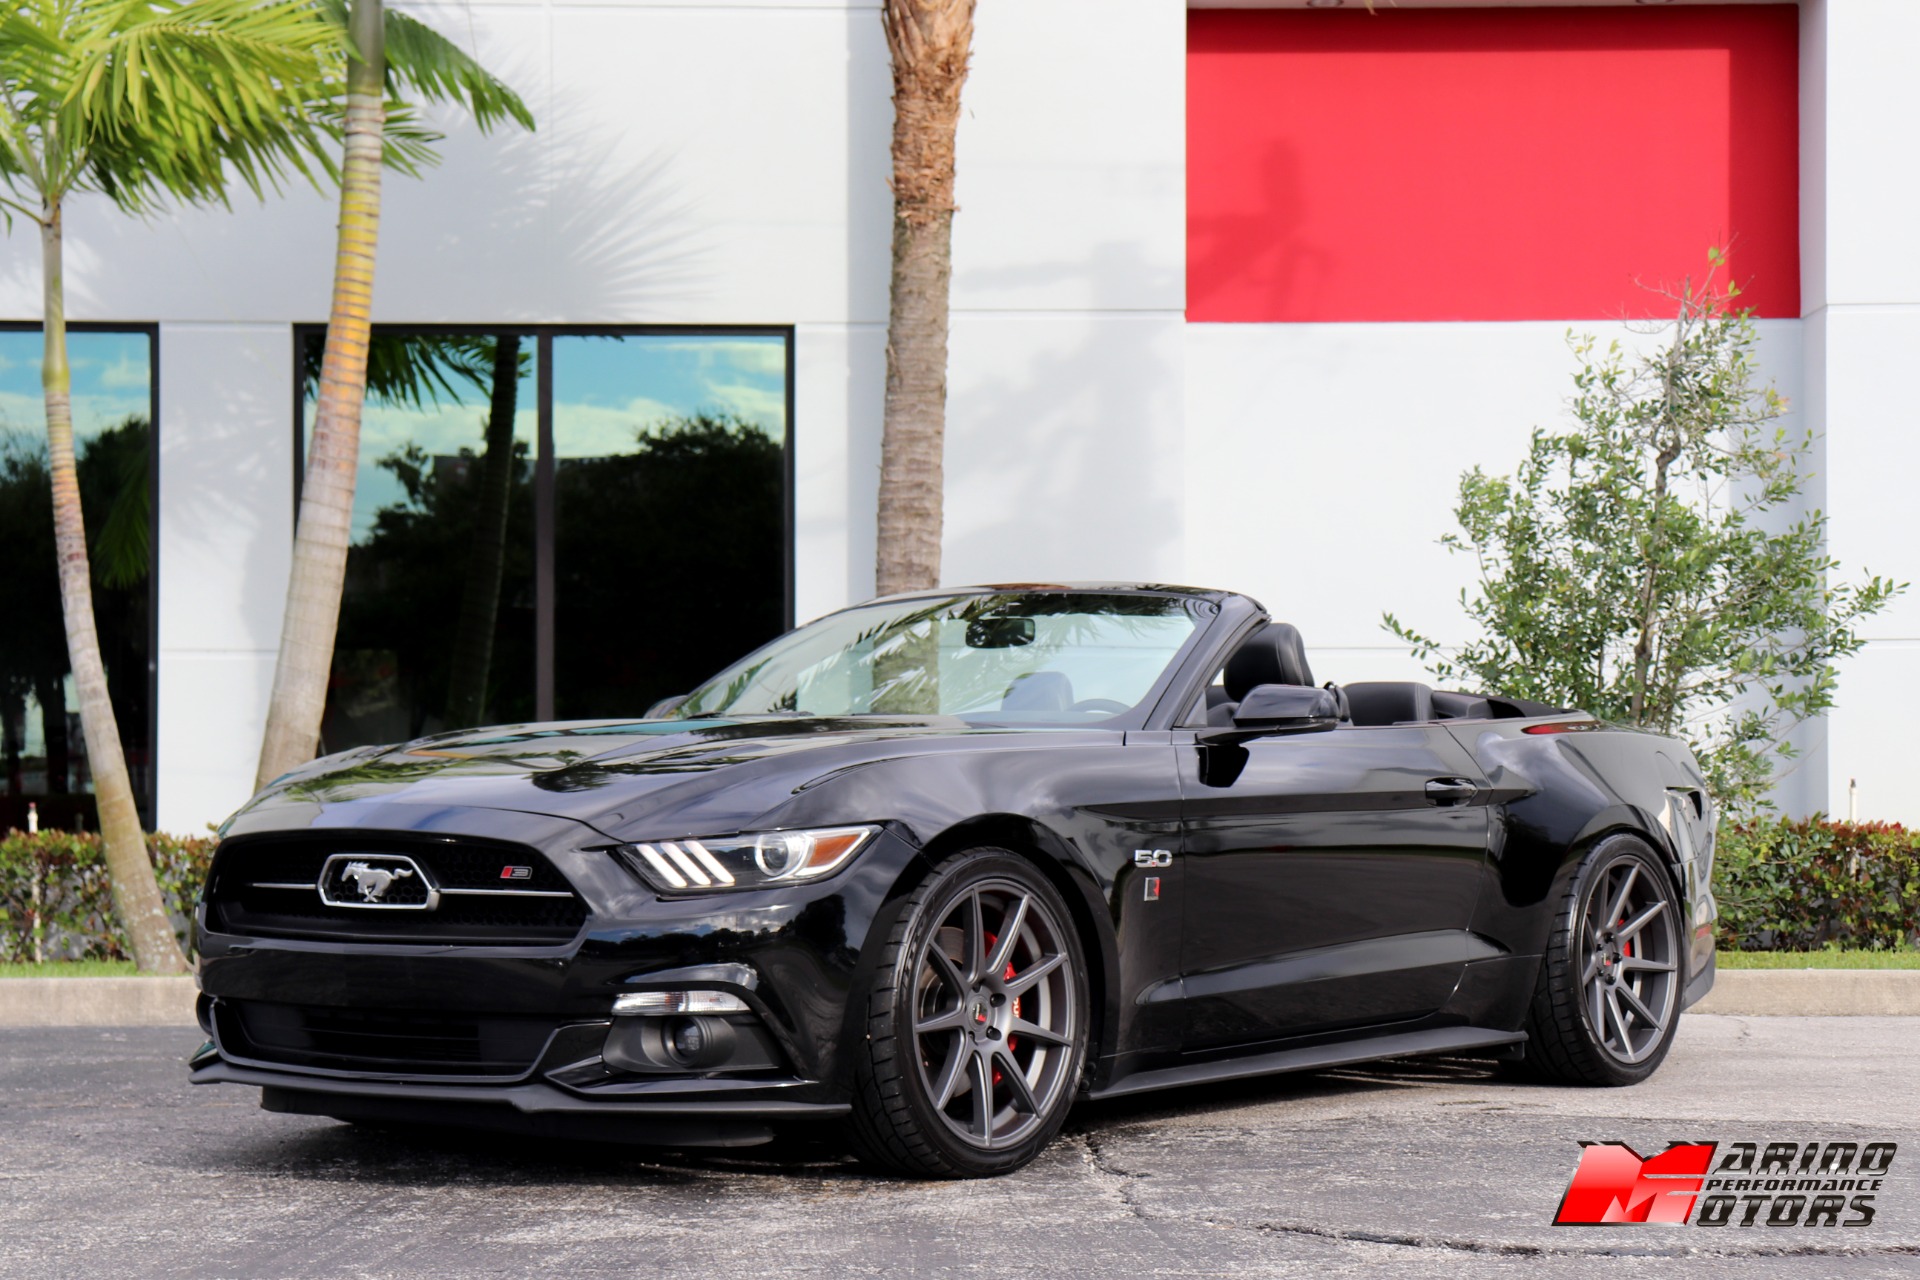 Used-2015-Ford-Mustang-GT-Premium-50th-Anniversary-Edition